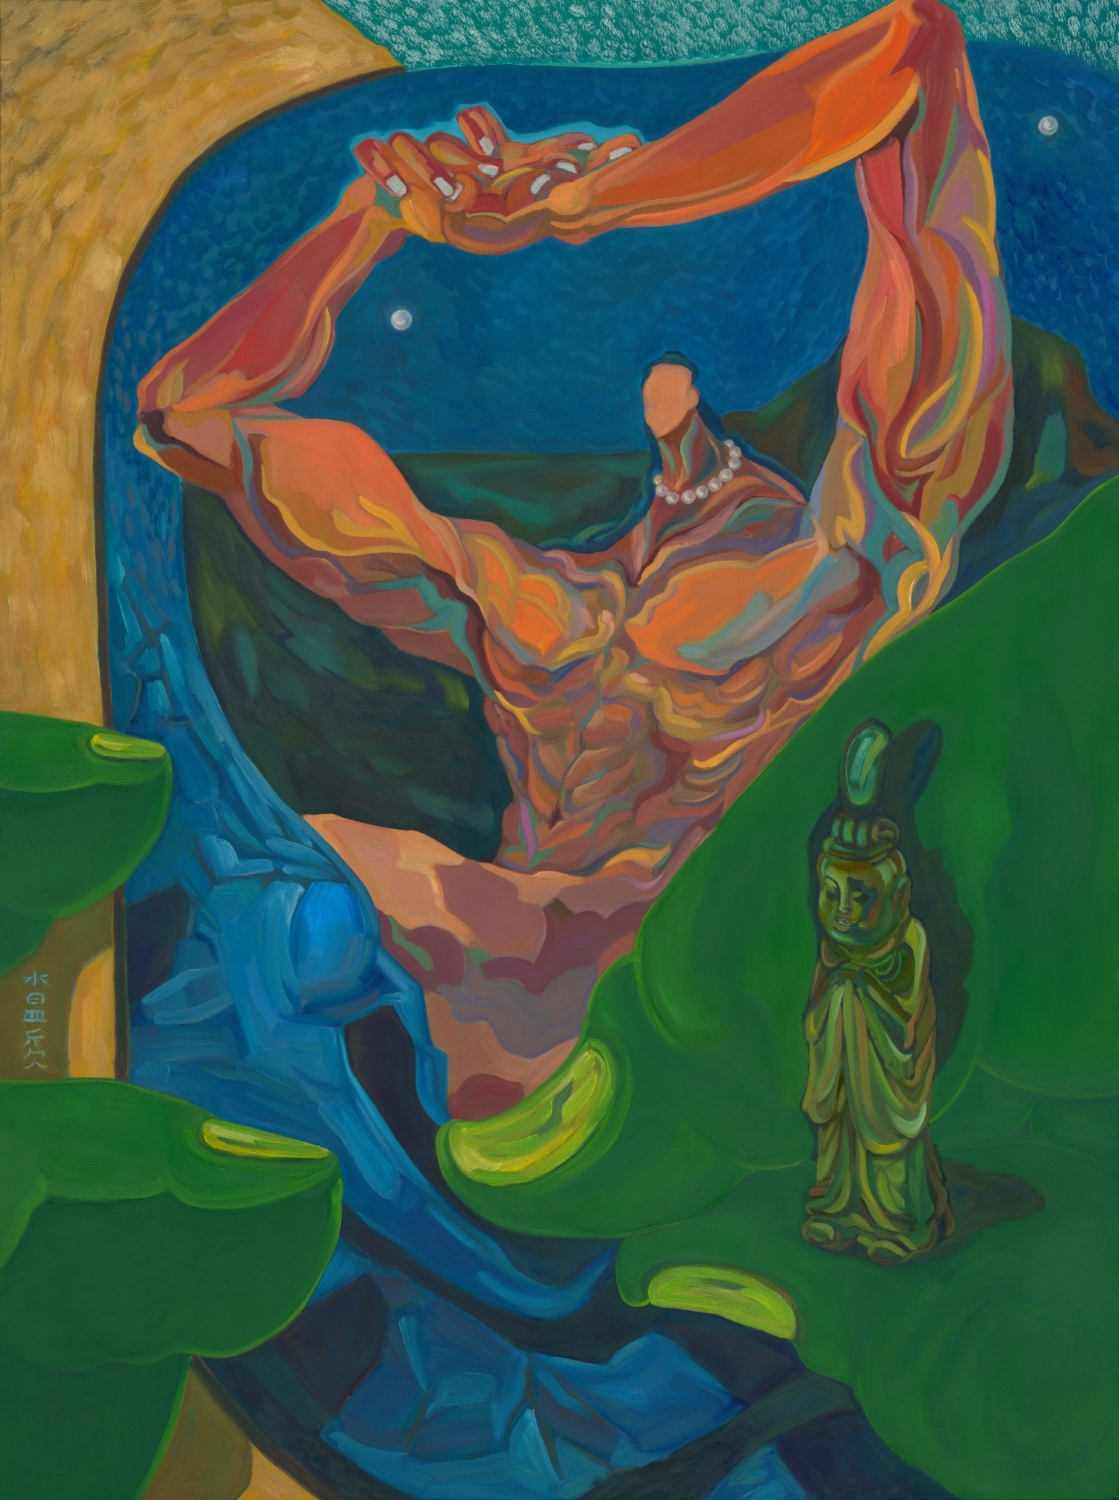 Xin Wen, The Night (或许夜风吹过), oil on canvas, 48 x 36 inches 2022-2023